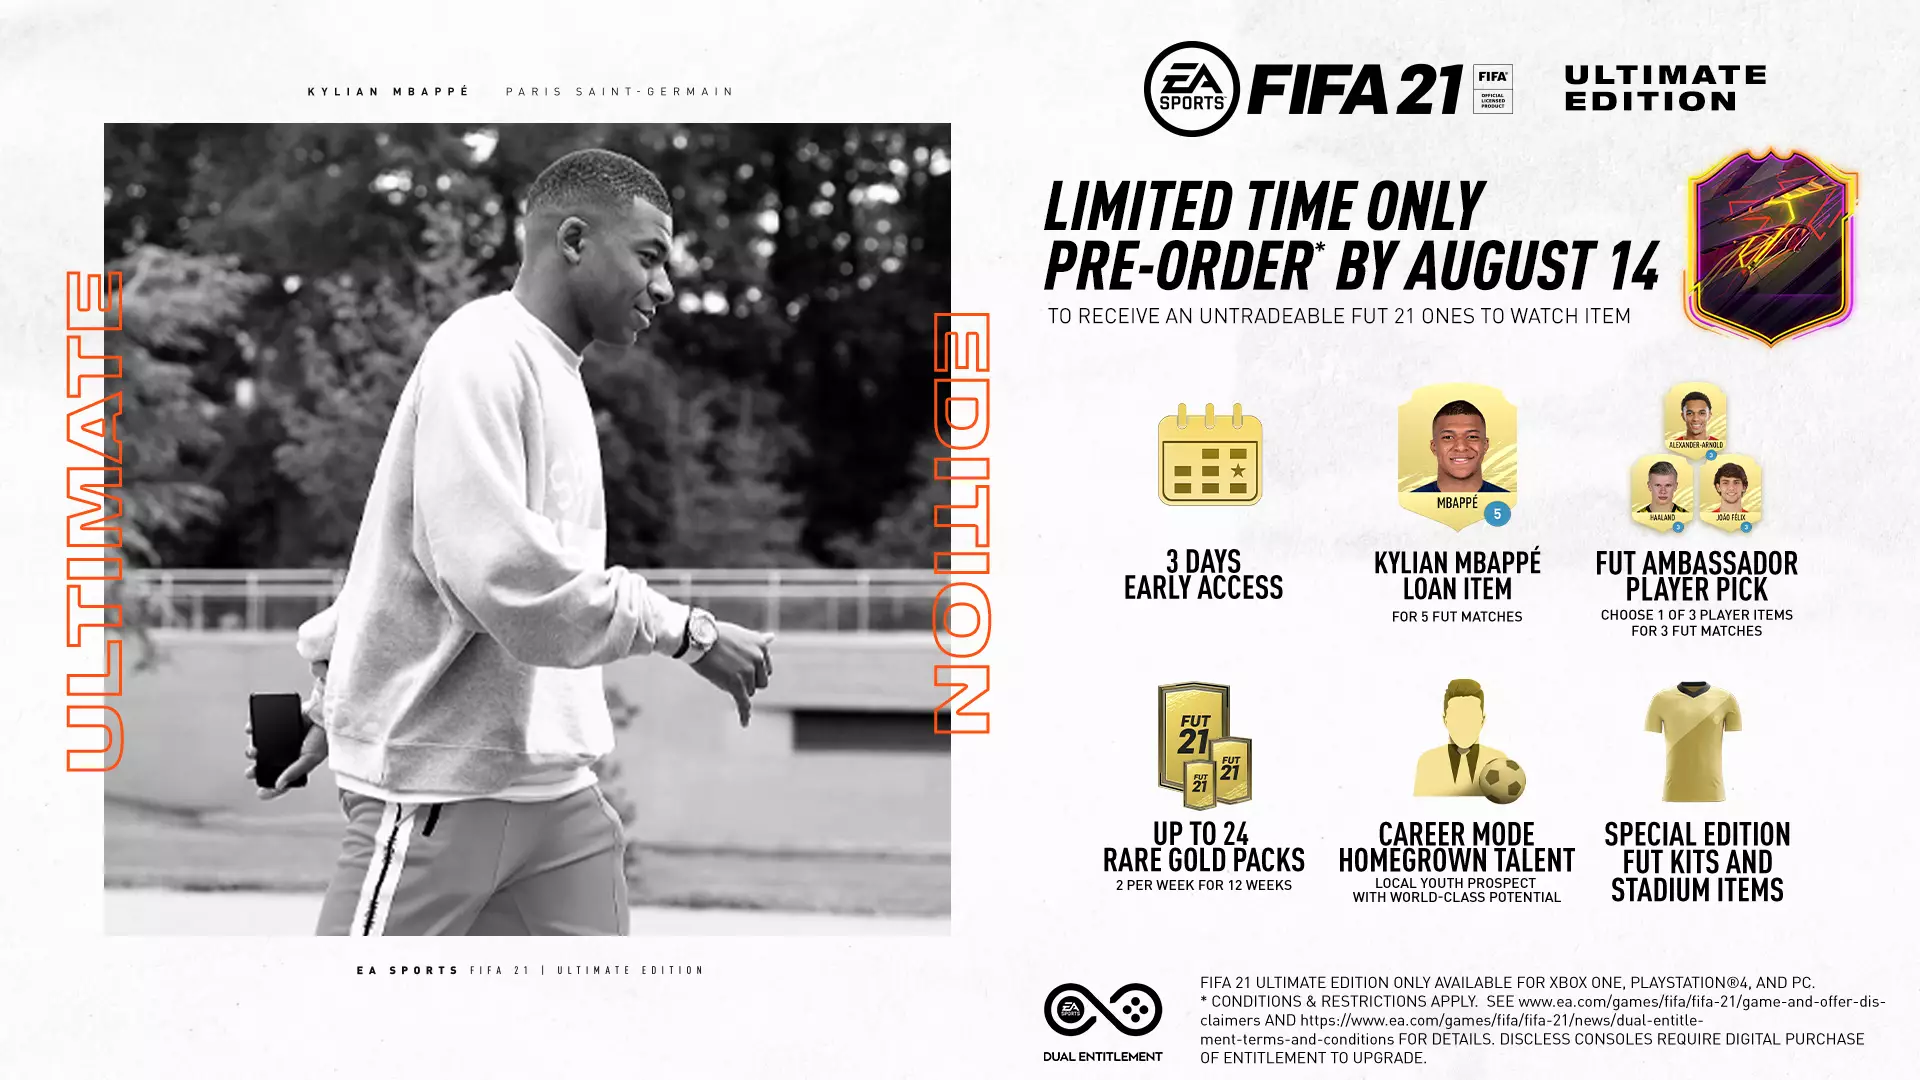 Pre-order bonuses for Ultimate Edition: One To Watch which is available until August 14. (Image